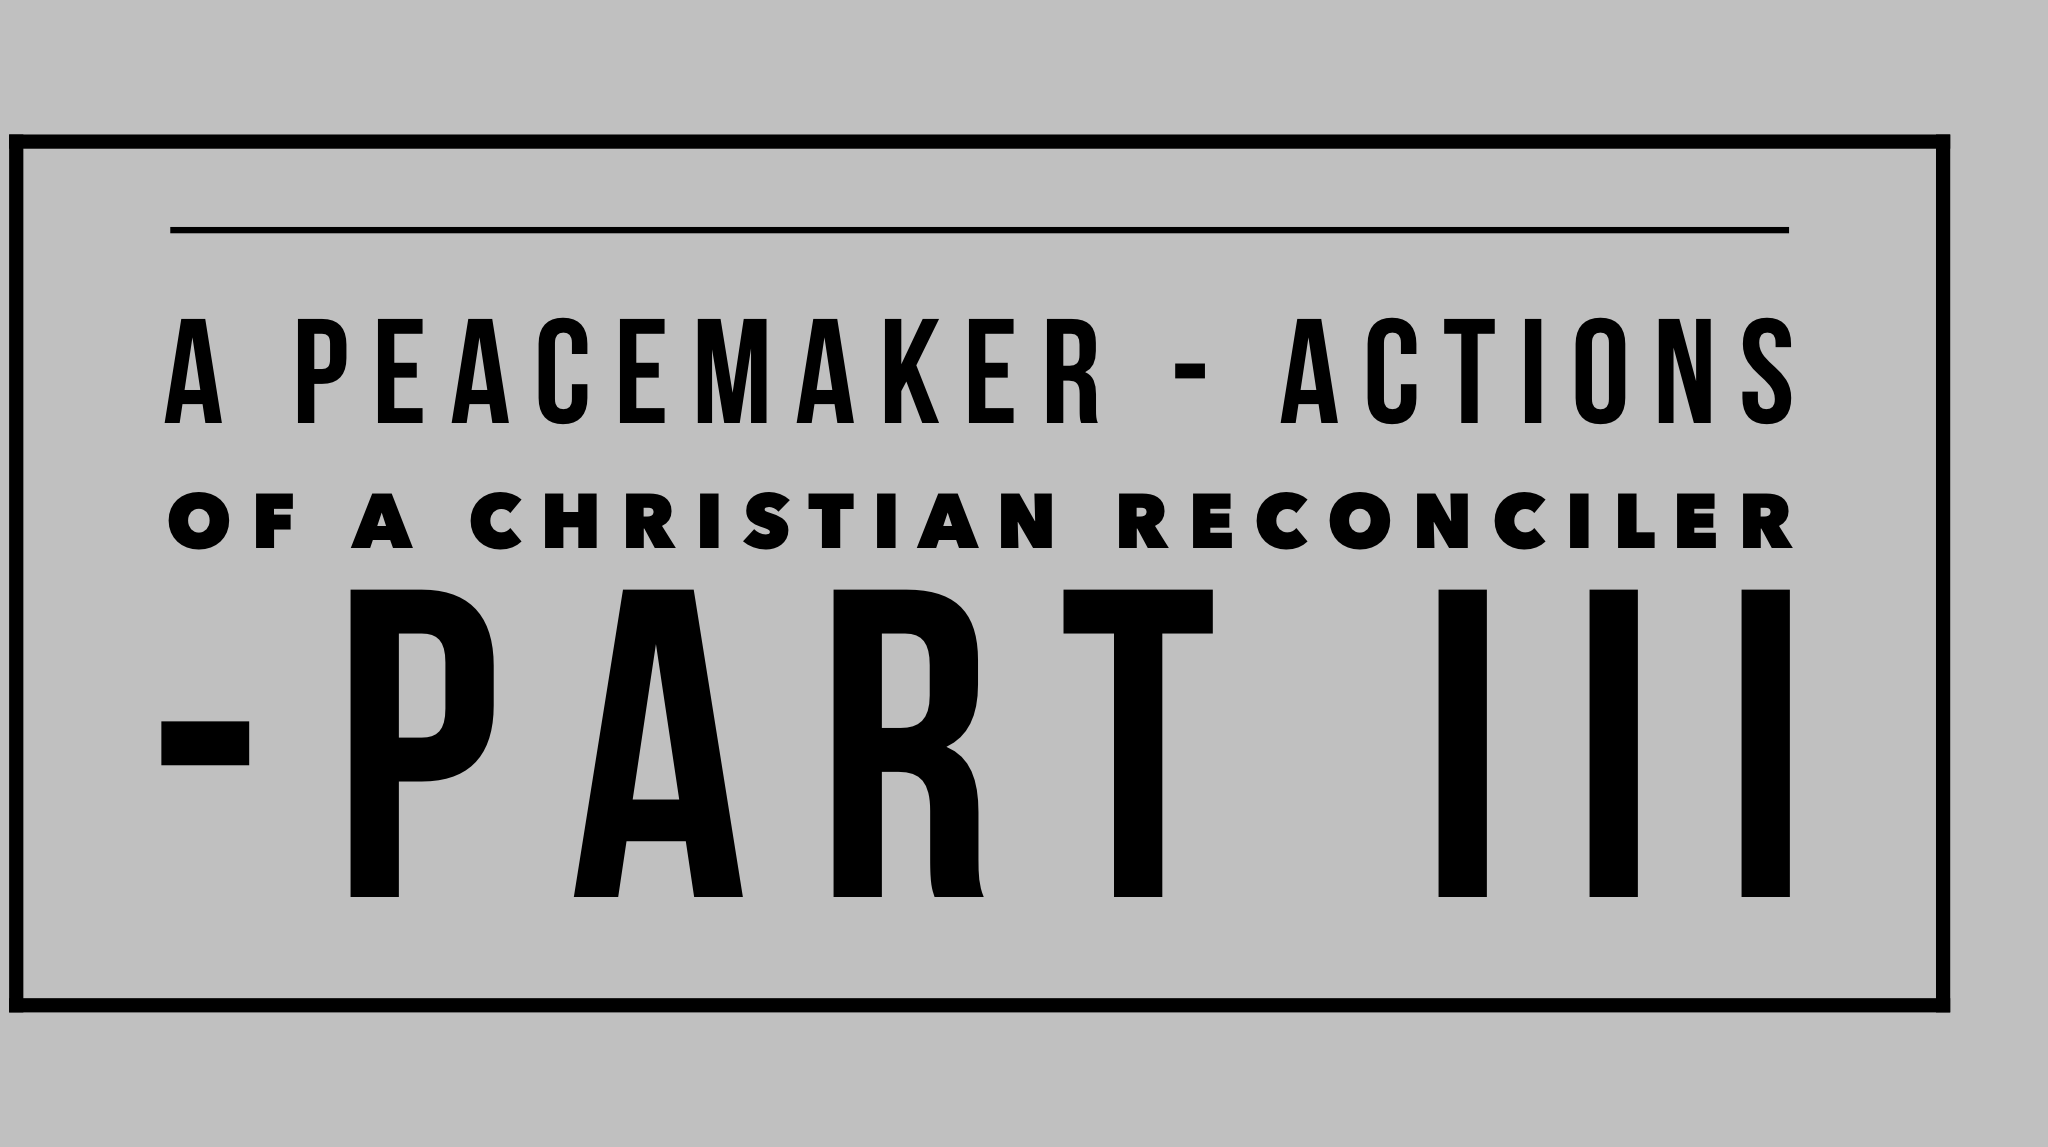 A Peacemaker - Actions of a christian reconciler Part III